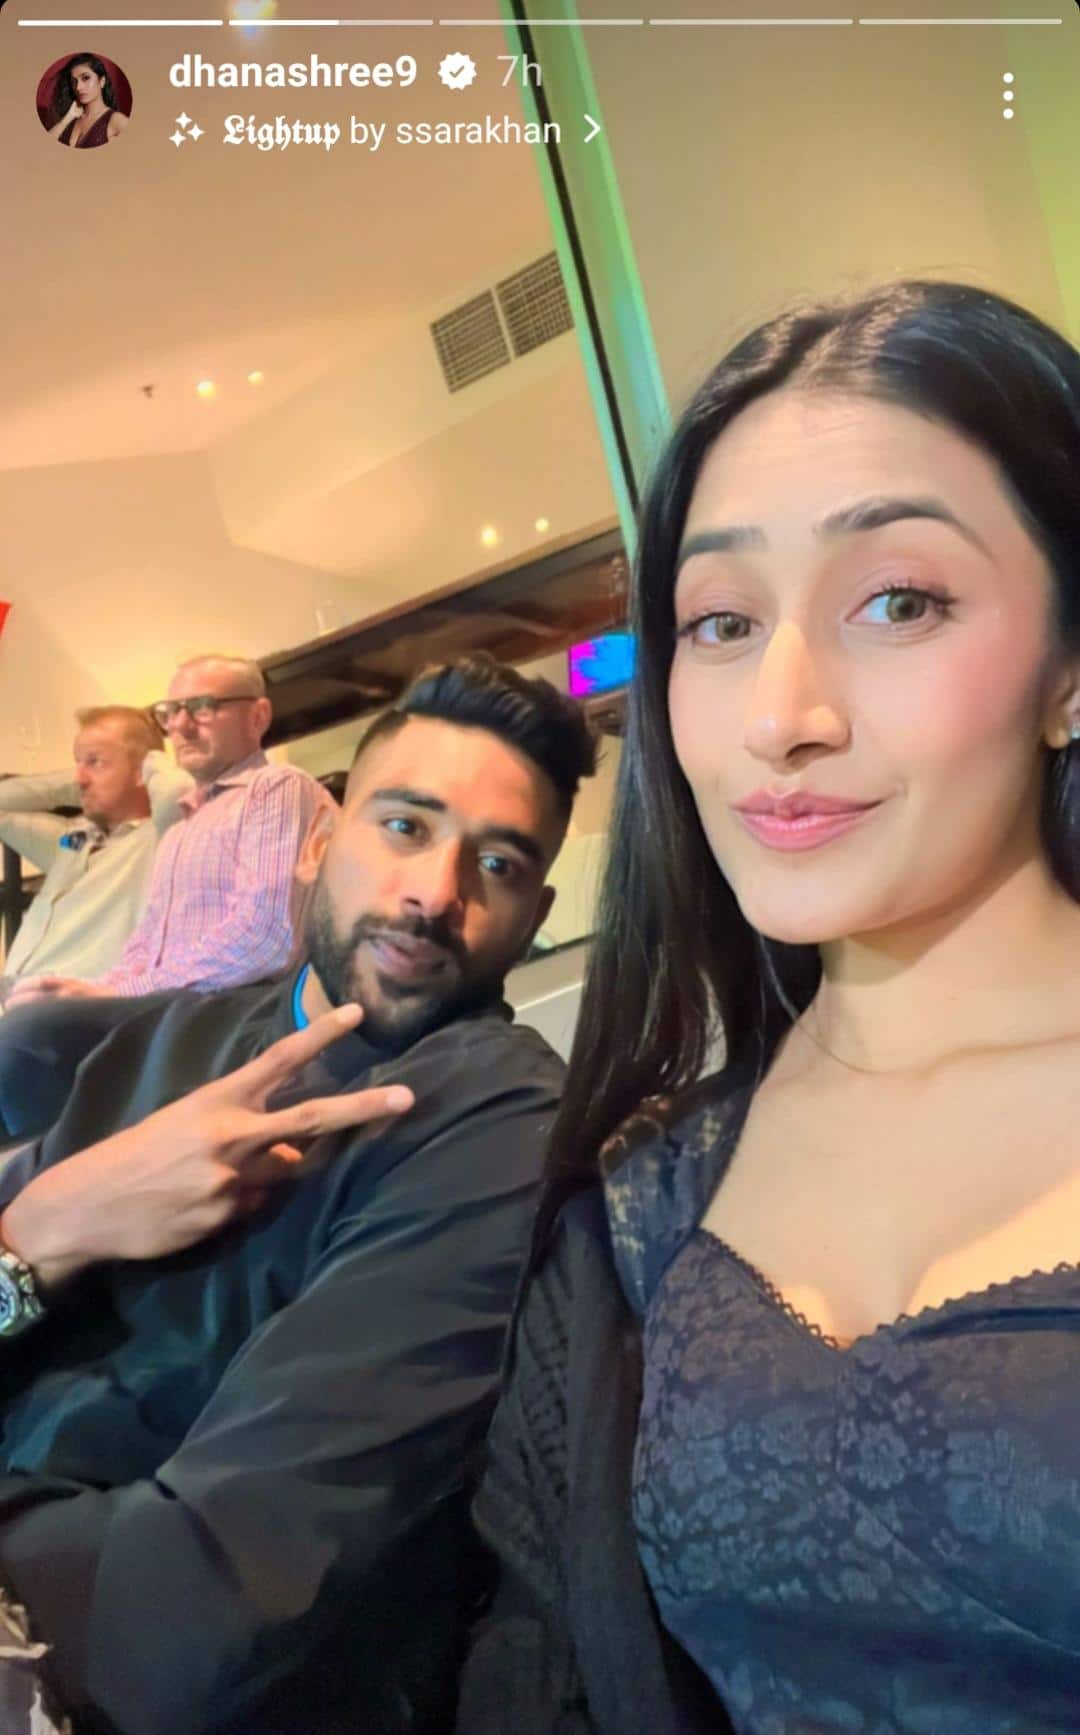 Check out Dhanashree Verma’s latest Instagram story featuring Mohammed Siraj